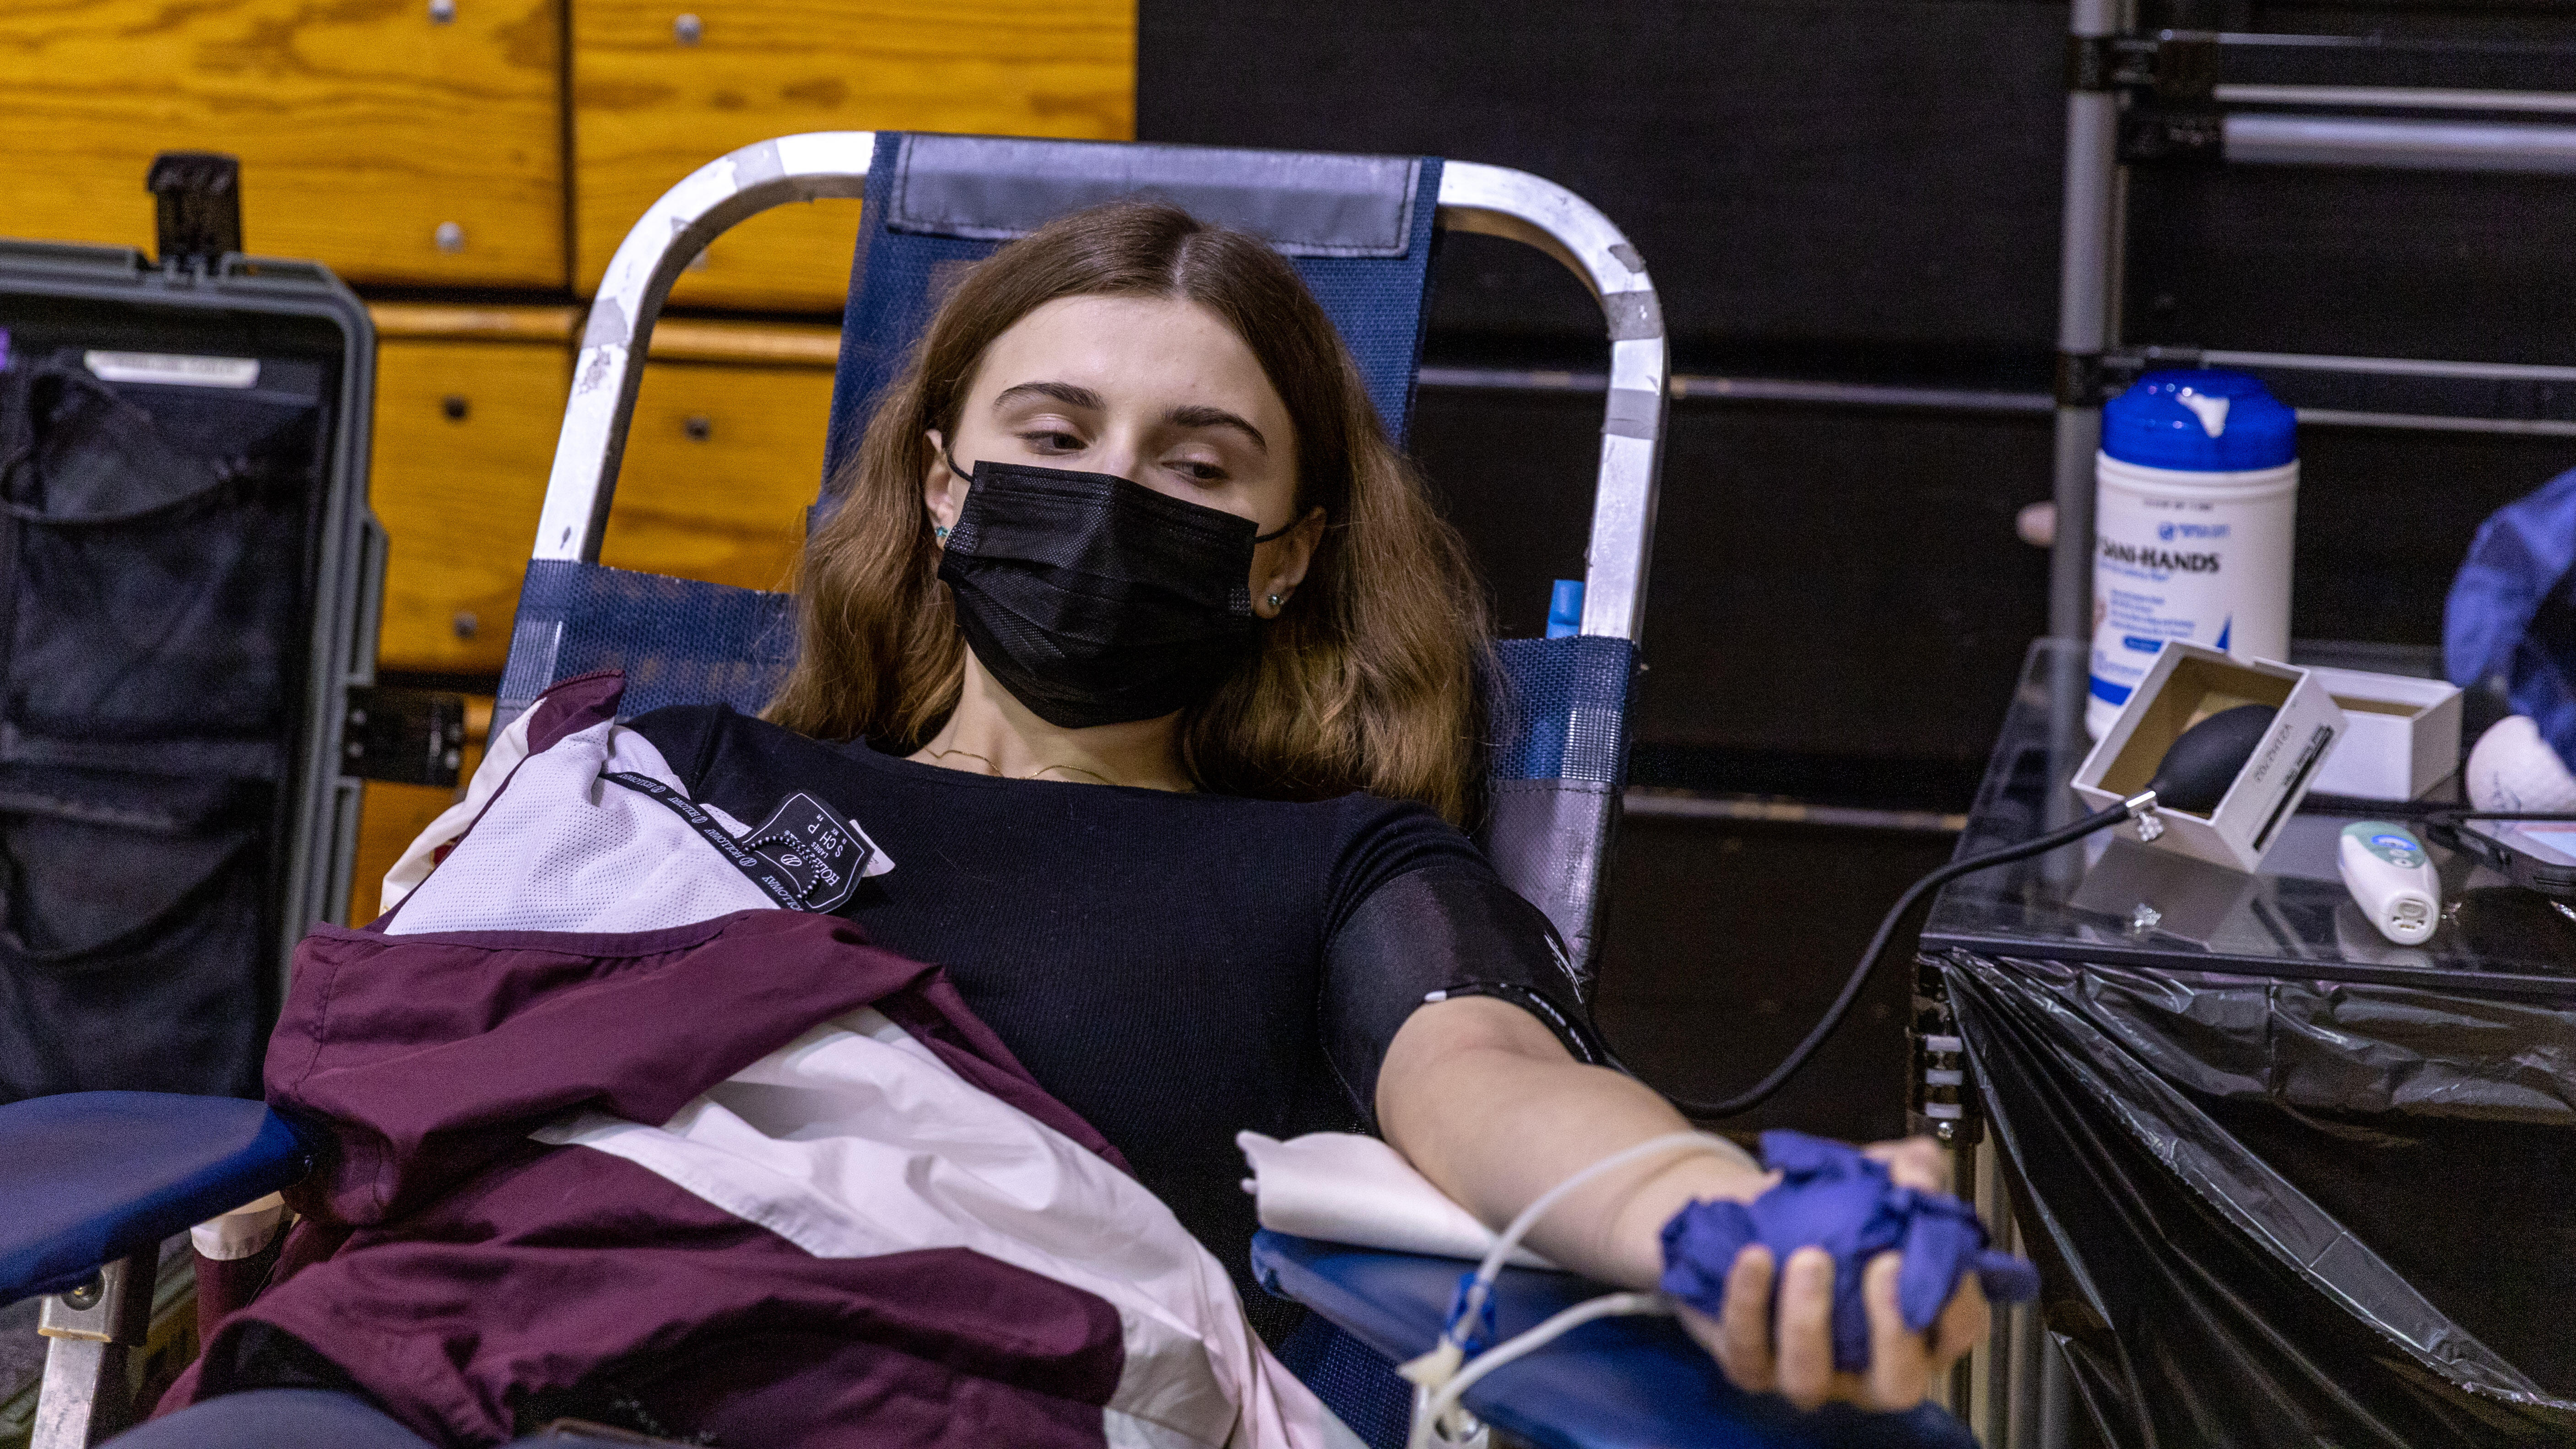 A teen donates blood as part of a blood drive at Steel Valley High School